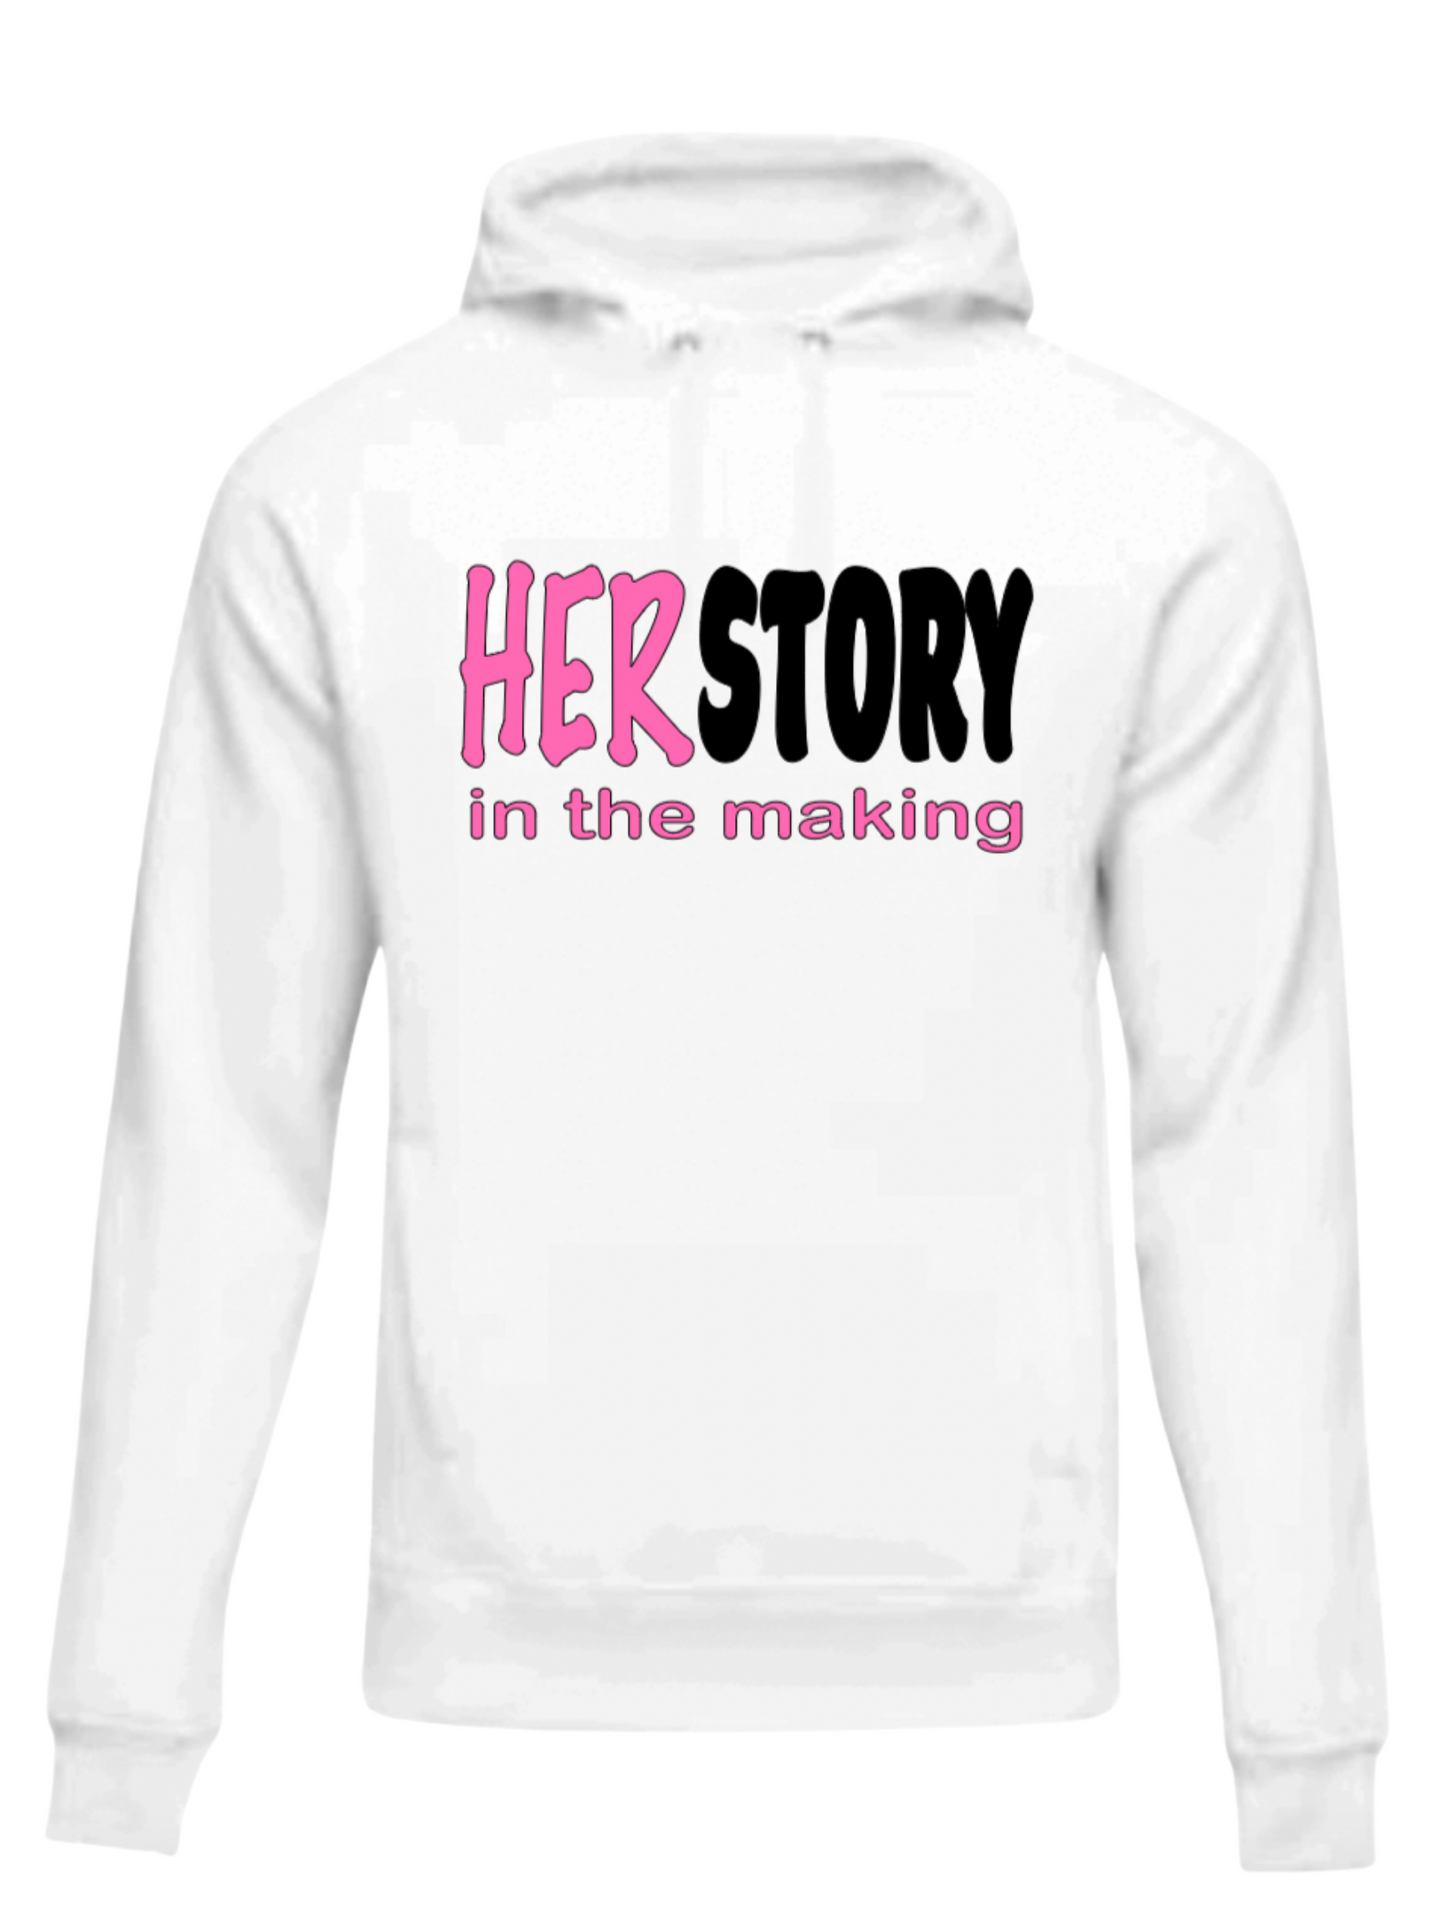 HERSTORY in the Making Tee and Hoodie